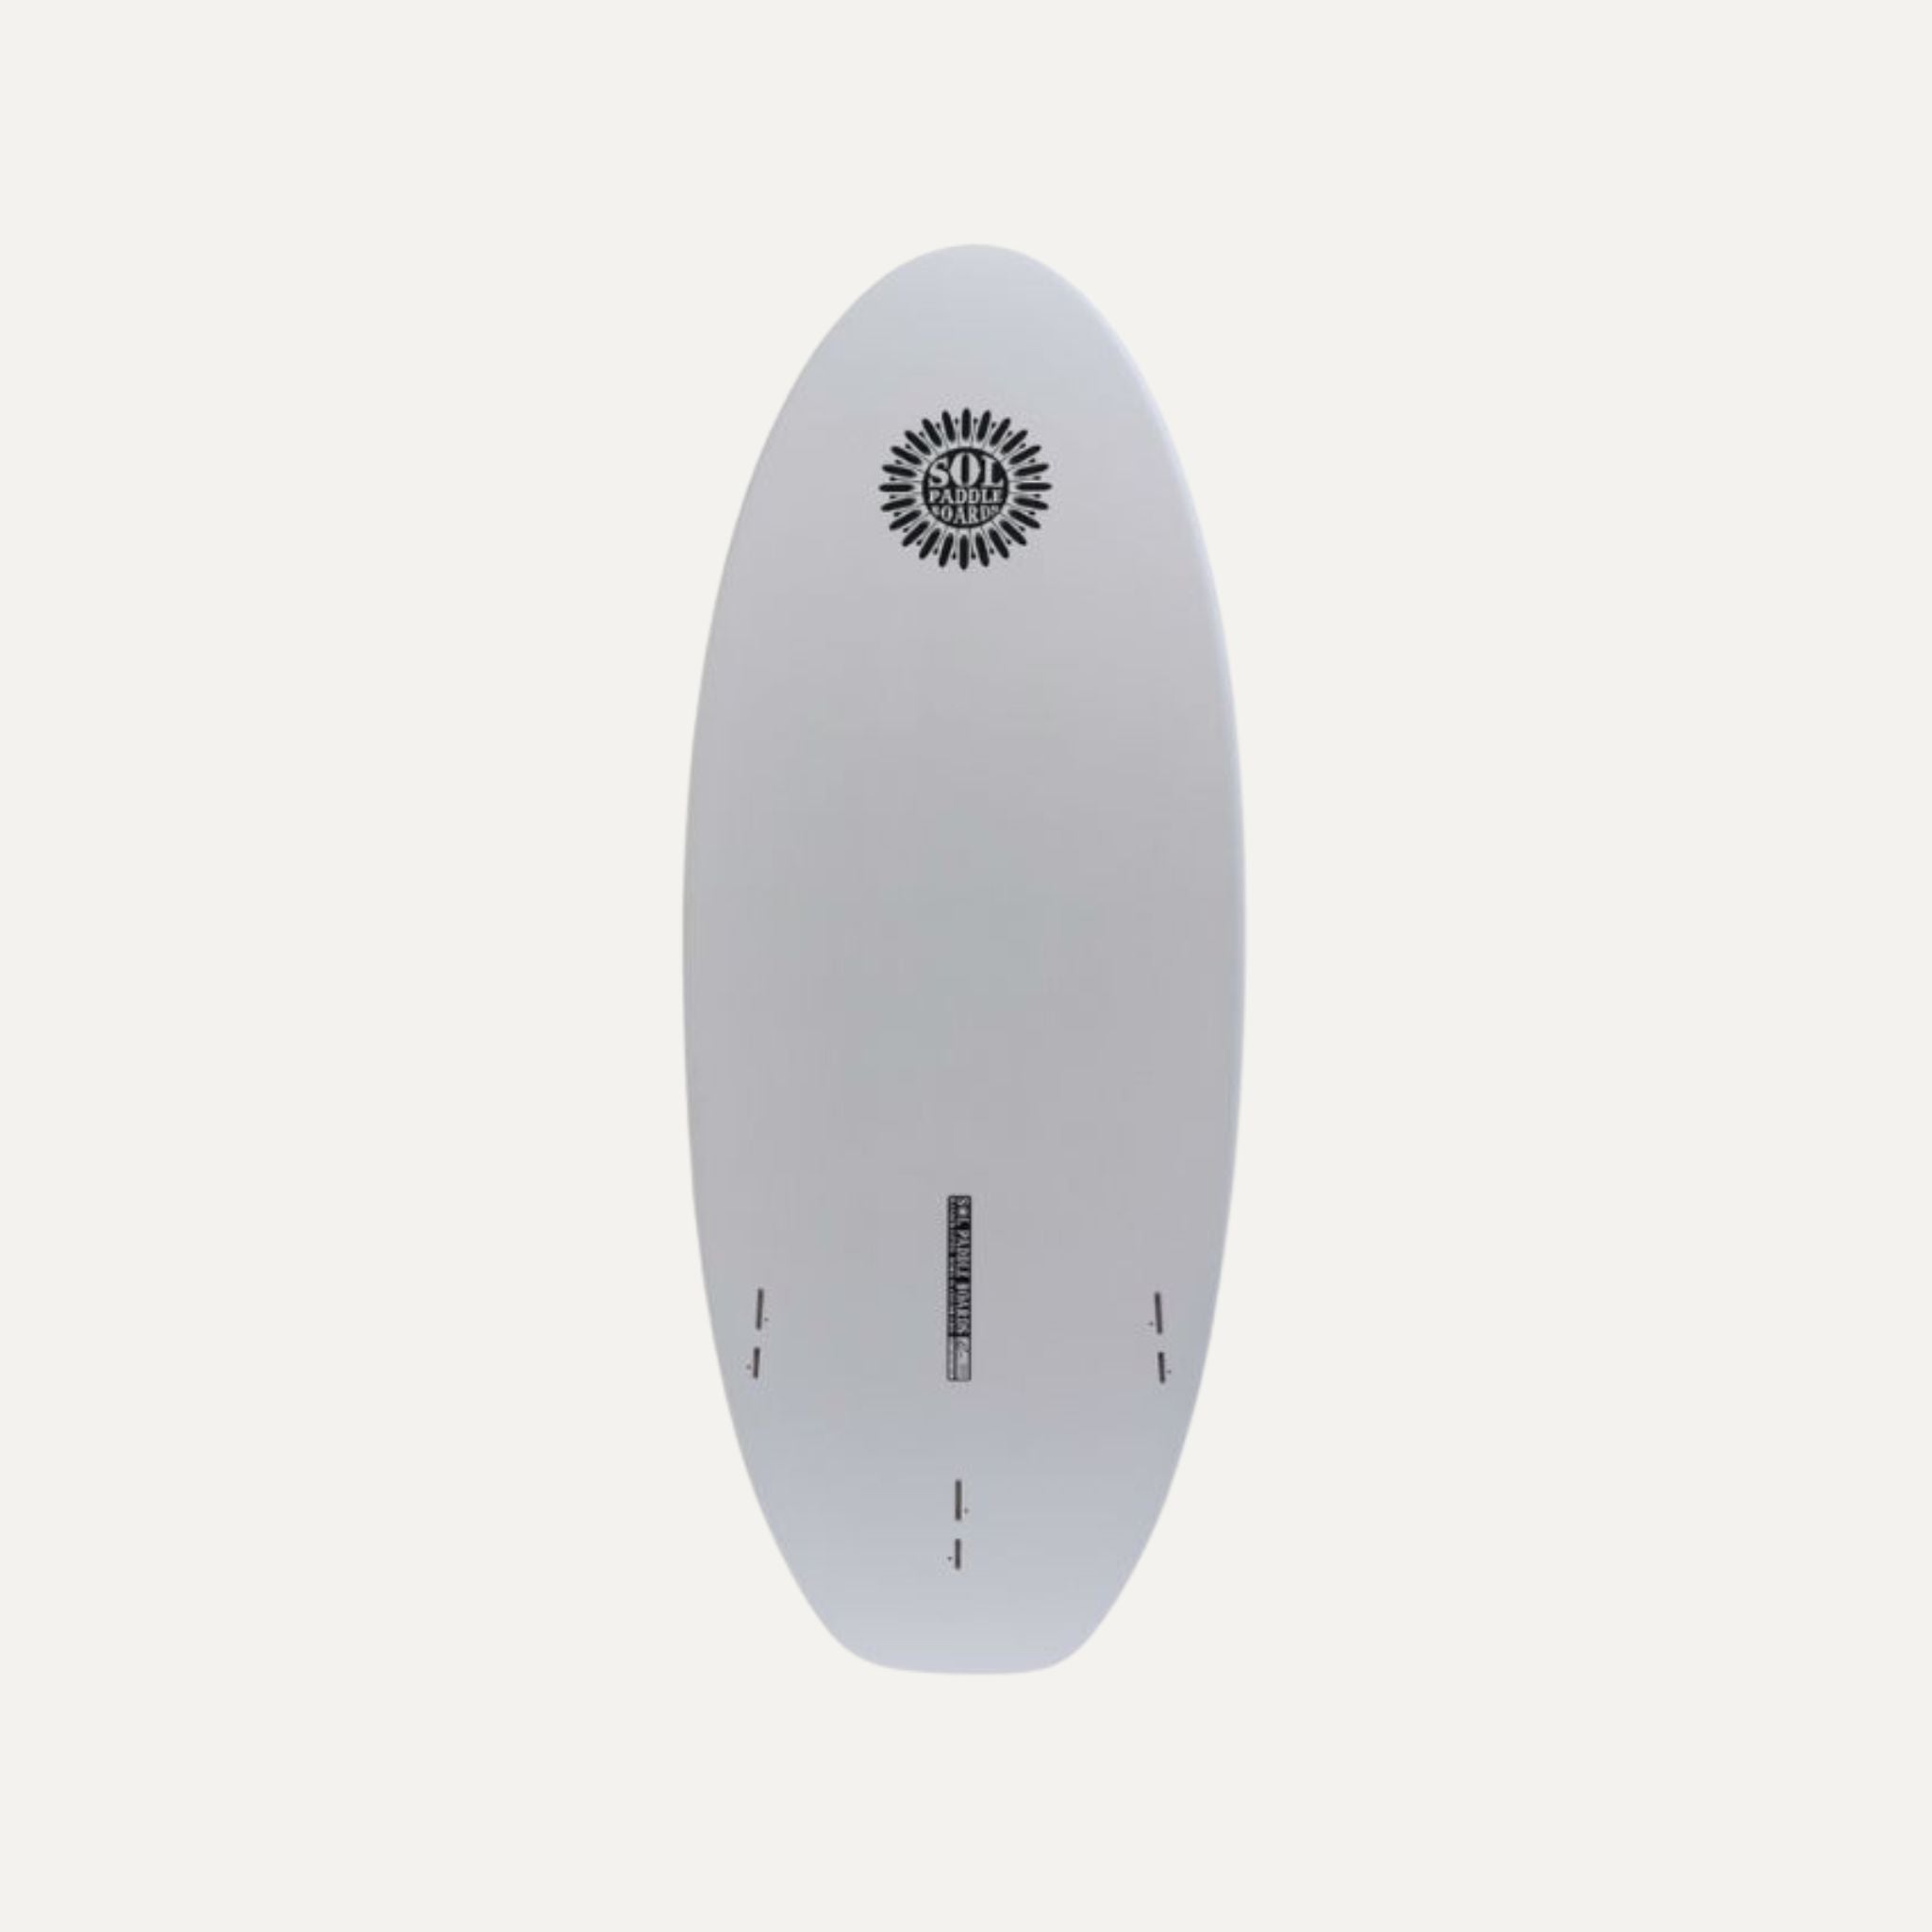 Bottom view of the SOL Paddle Boards' SOLscepterXL Epoxy Prone River Surfboard, showcasing a smooth, white surface with a black SOL Paddle Boards logo near the top. The board features multiple fin slots near the bottom and a central slot for additional accessories or attachments.